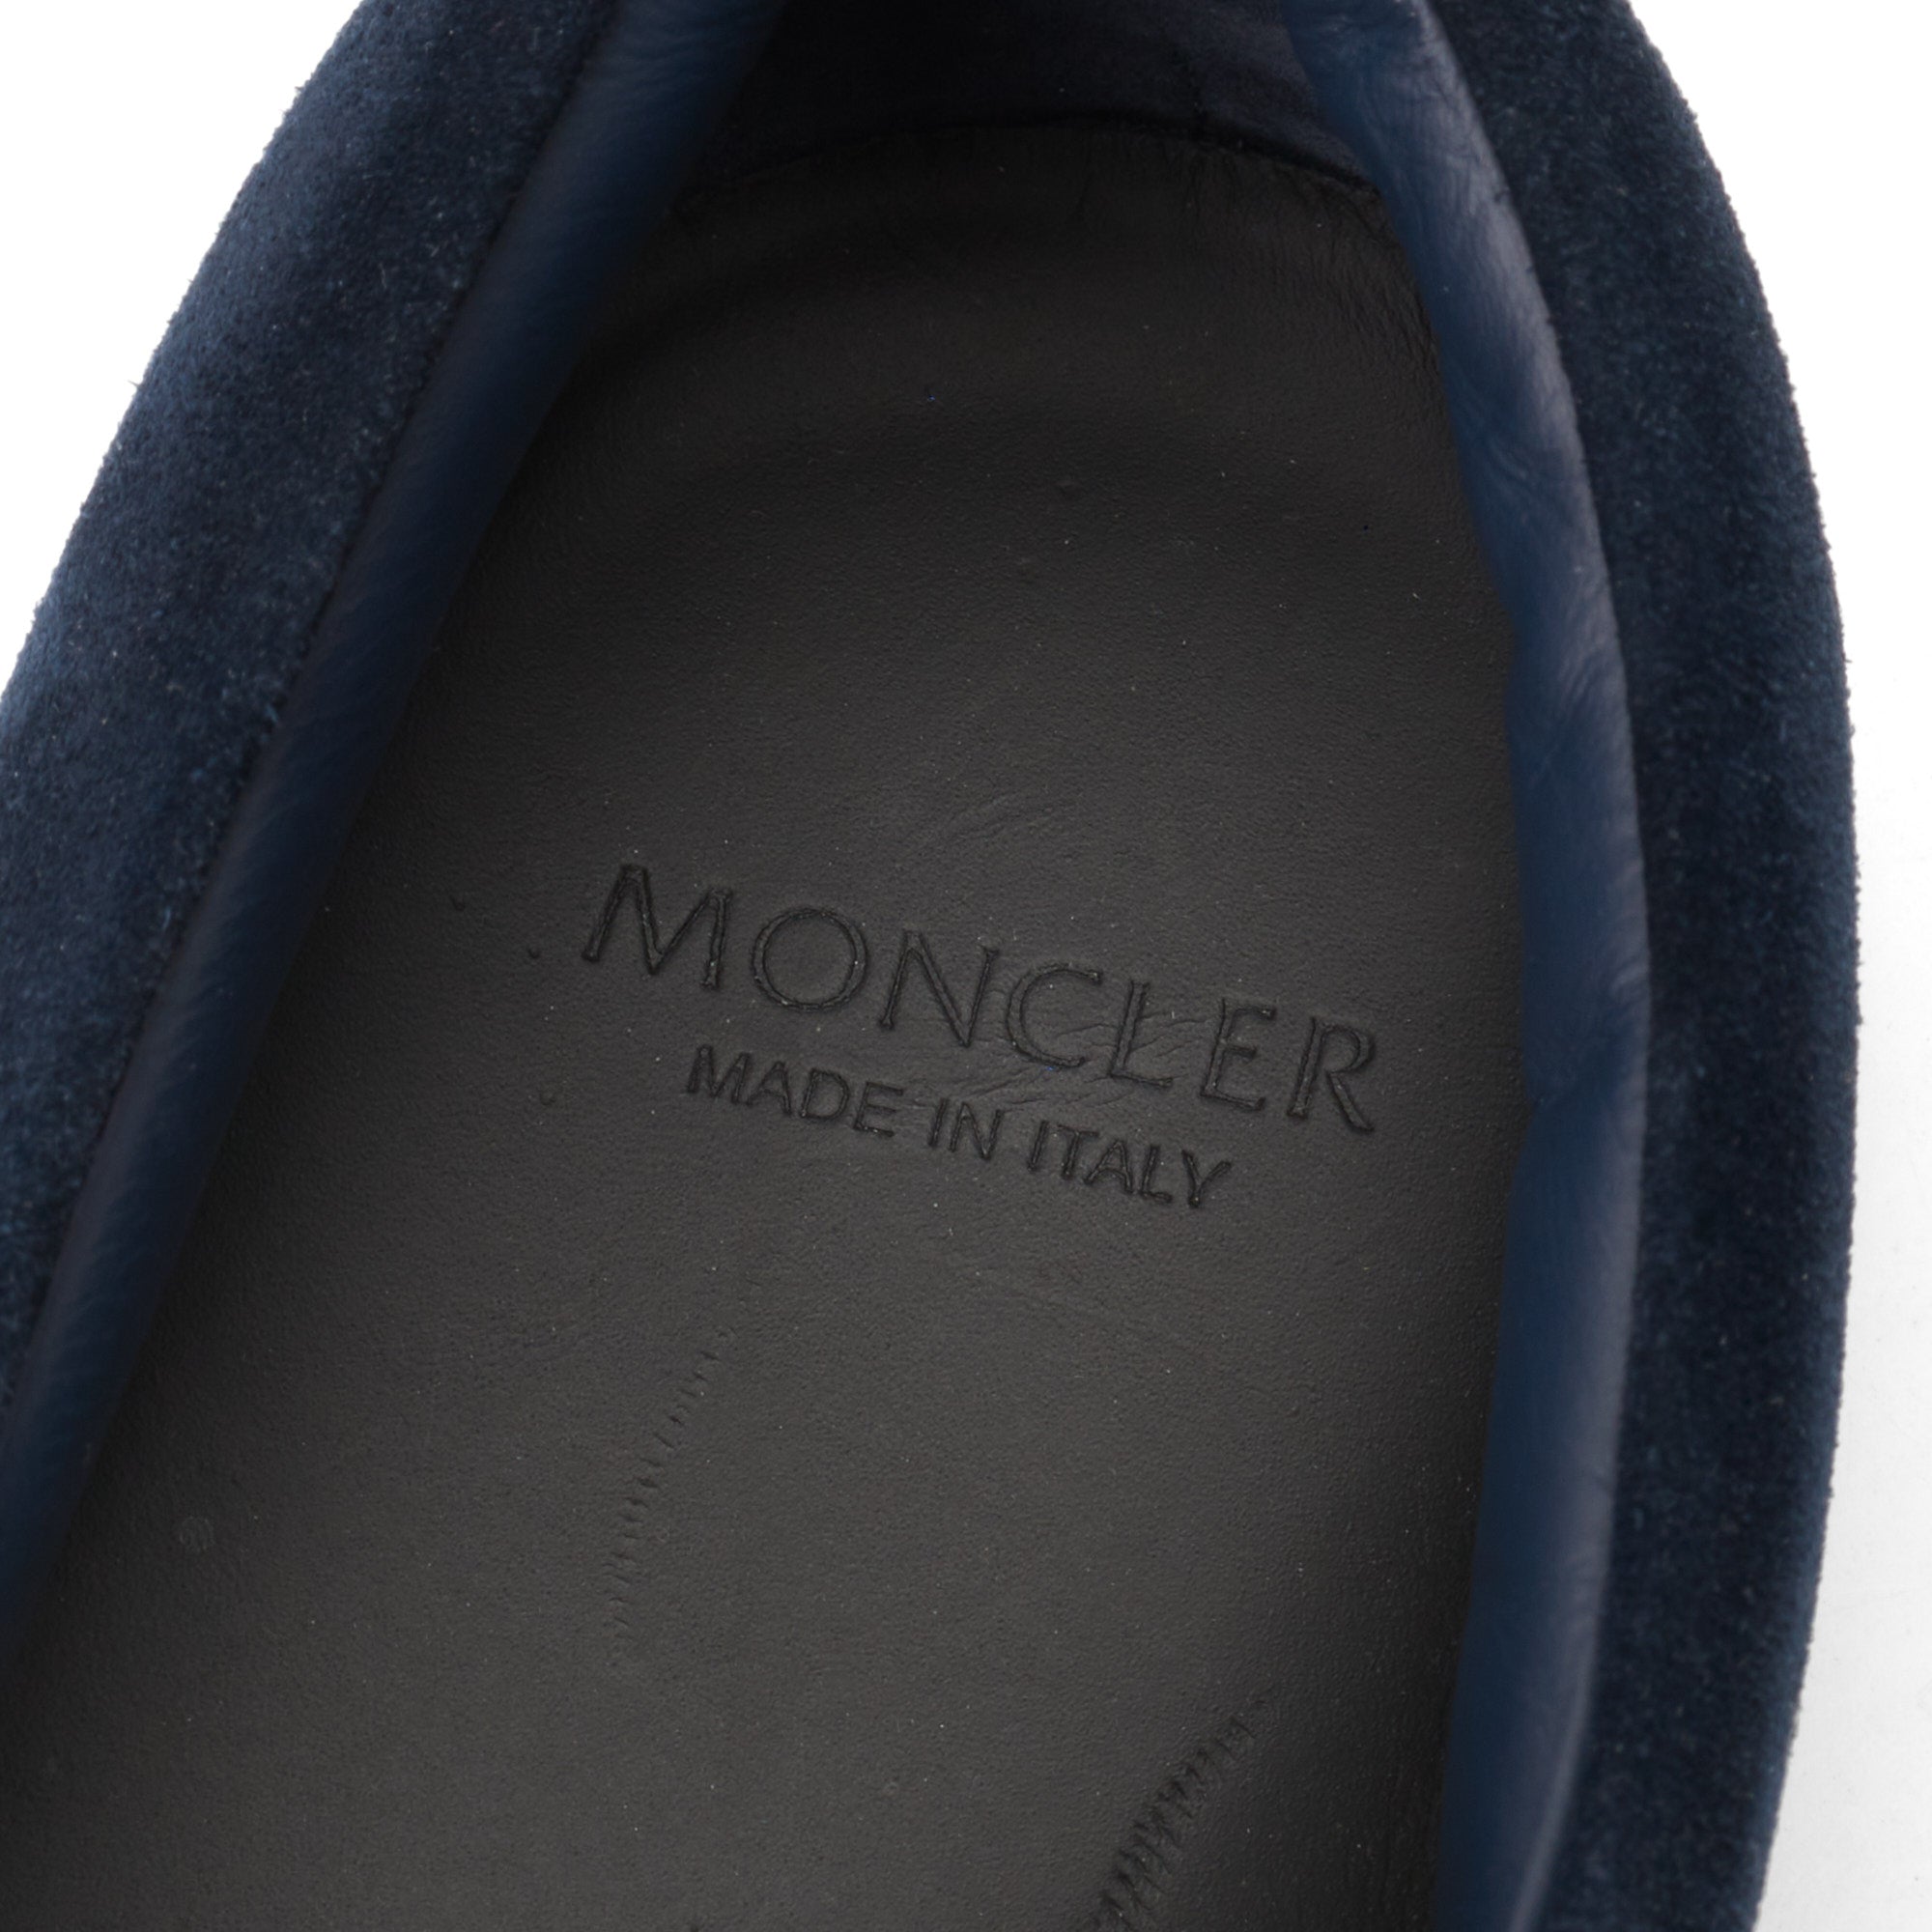 MONCLER Meredith Blue Suede Leather Loafer Slip-on Sneakers EU 40 US 7 NEW MONCLER